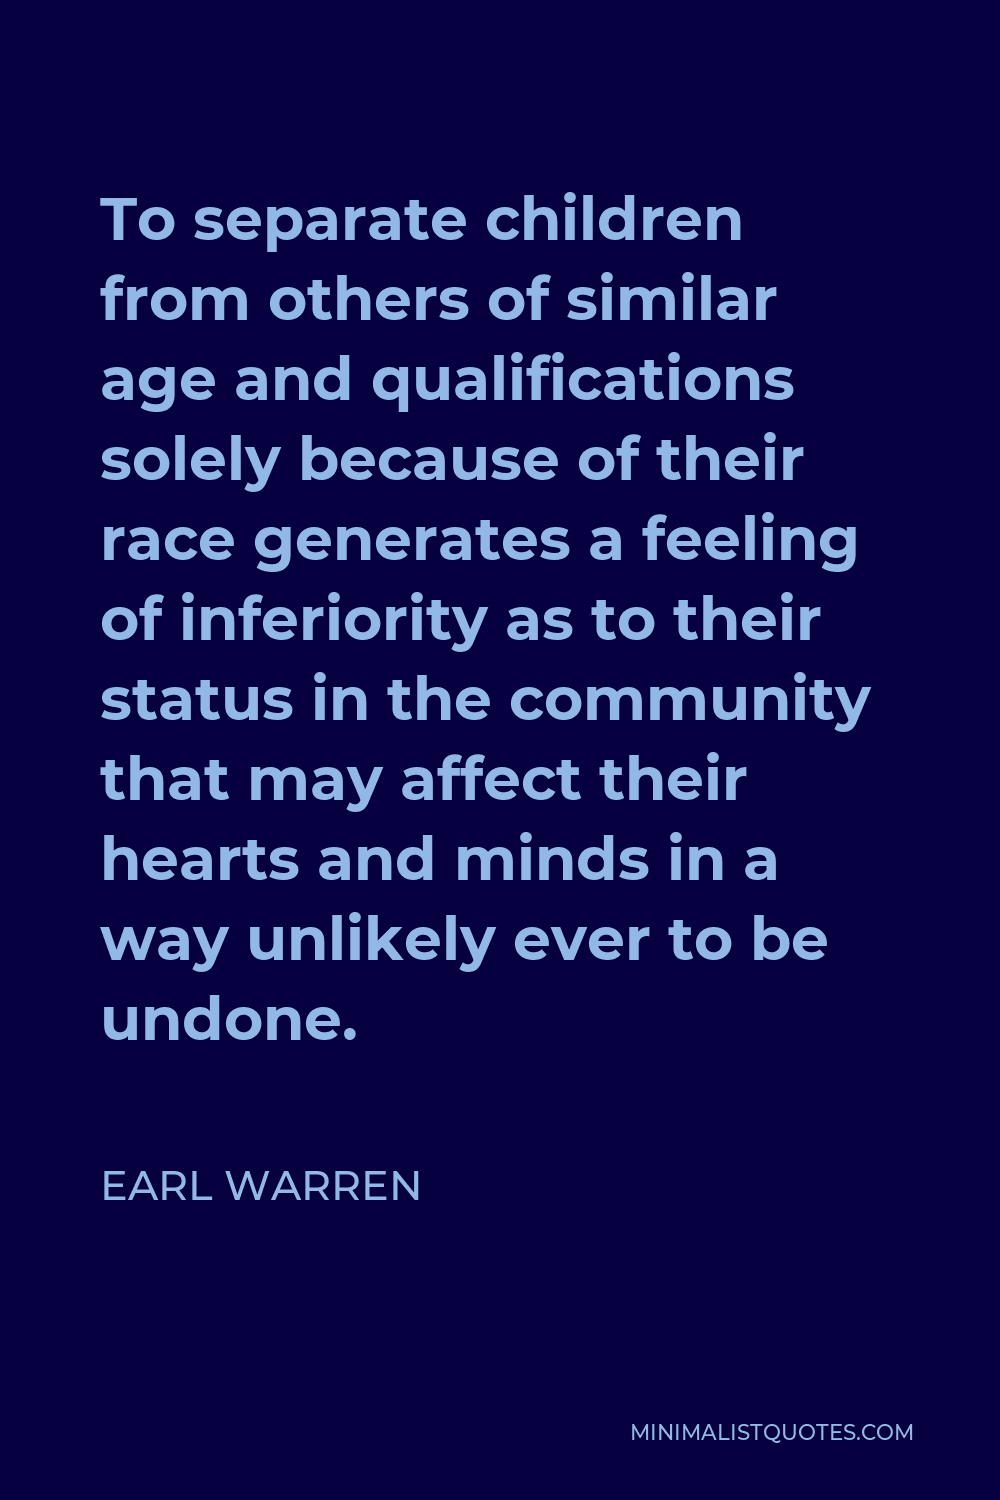 Earl Warren Quote - To separate children from others of similar age and qualifications solely because of their race generates a feeling of inferiority as to their status in the community that may affect their hearts and minds in a way unlikely ever to be undone.